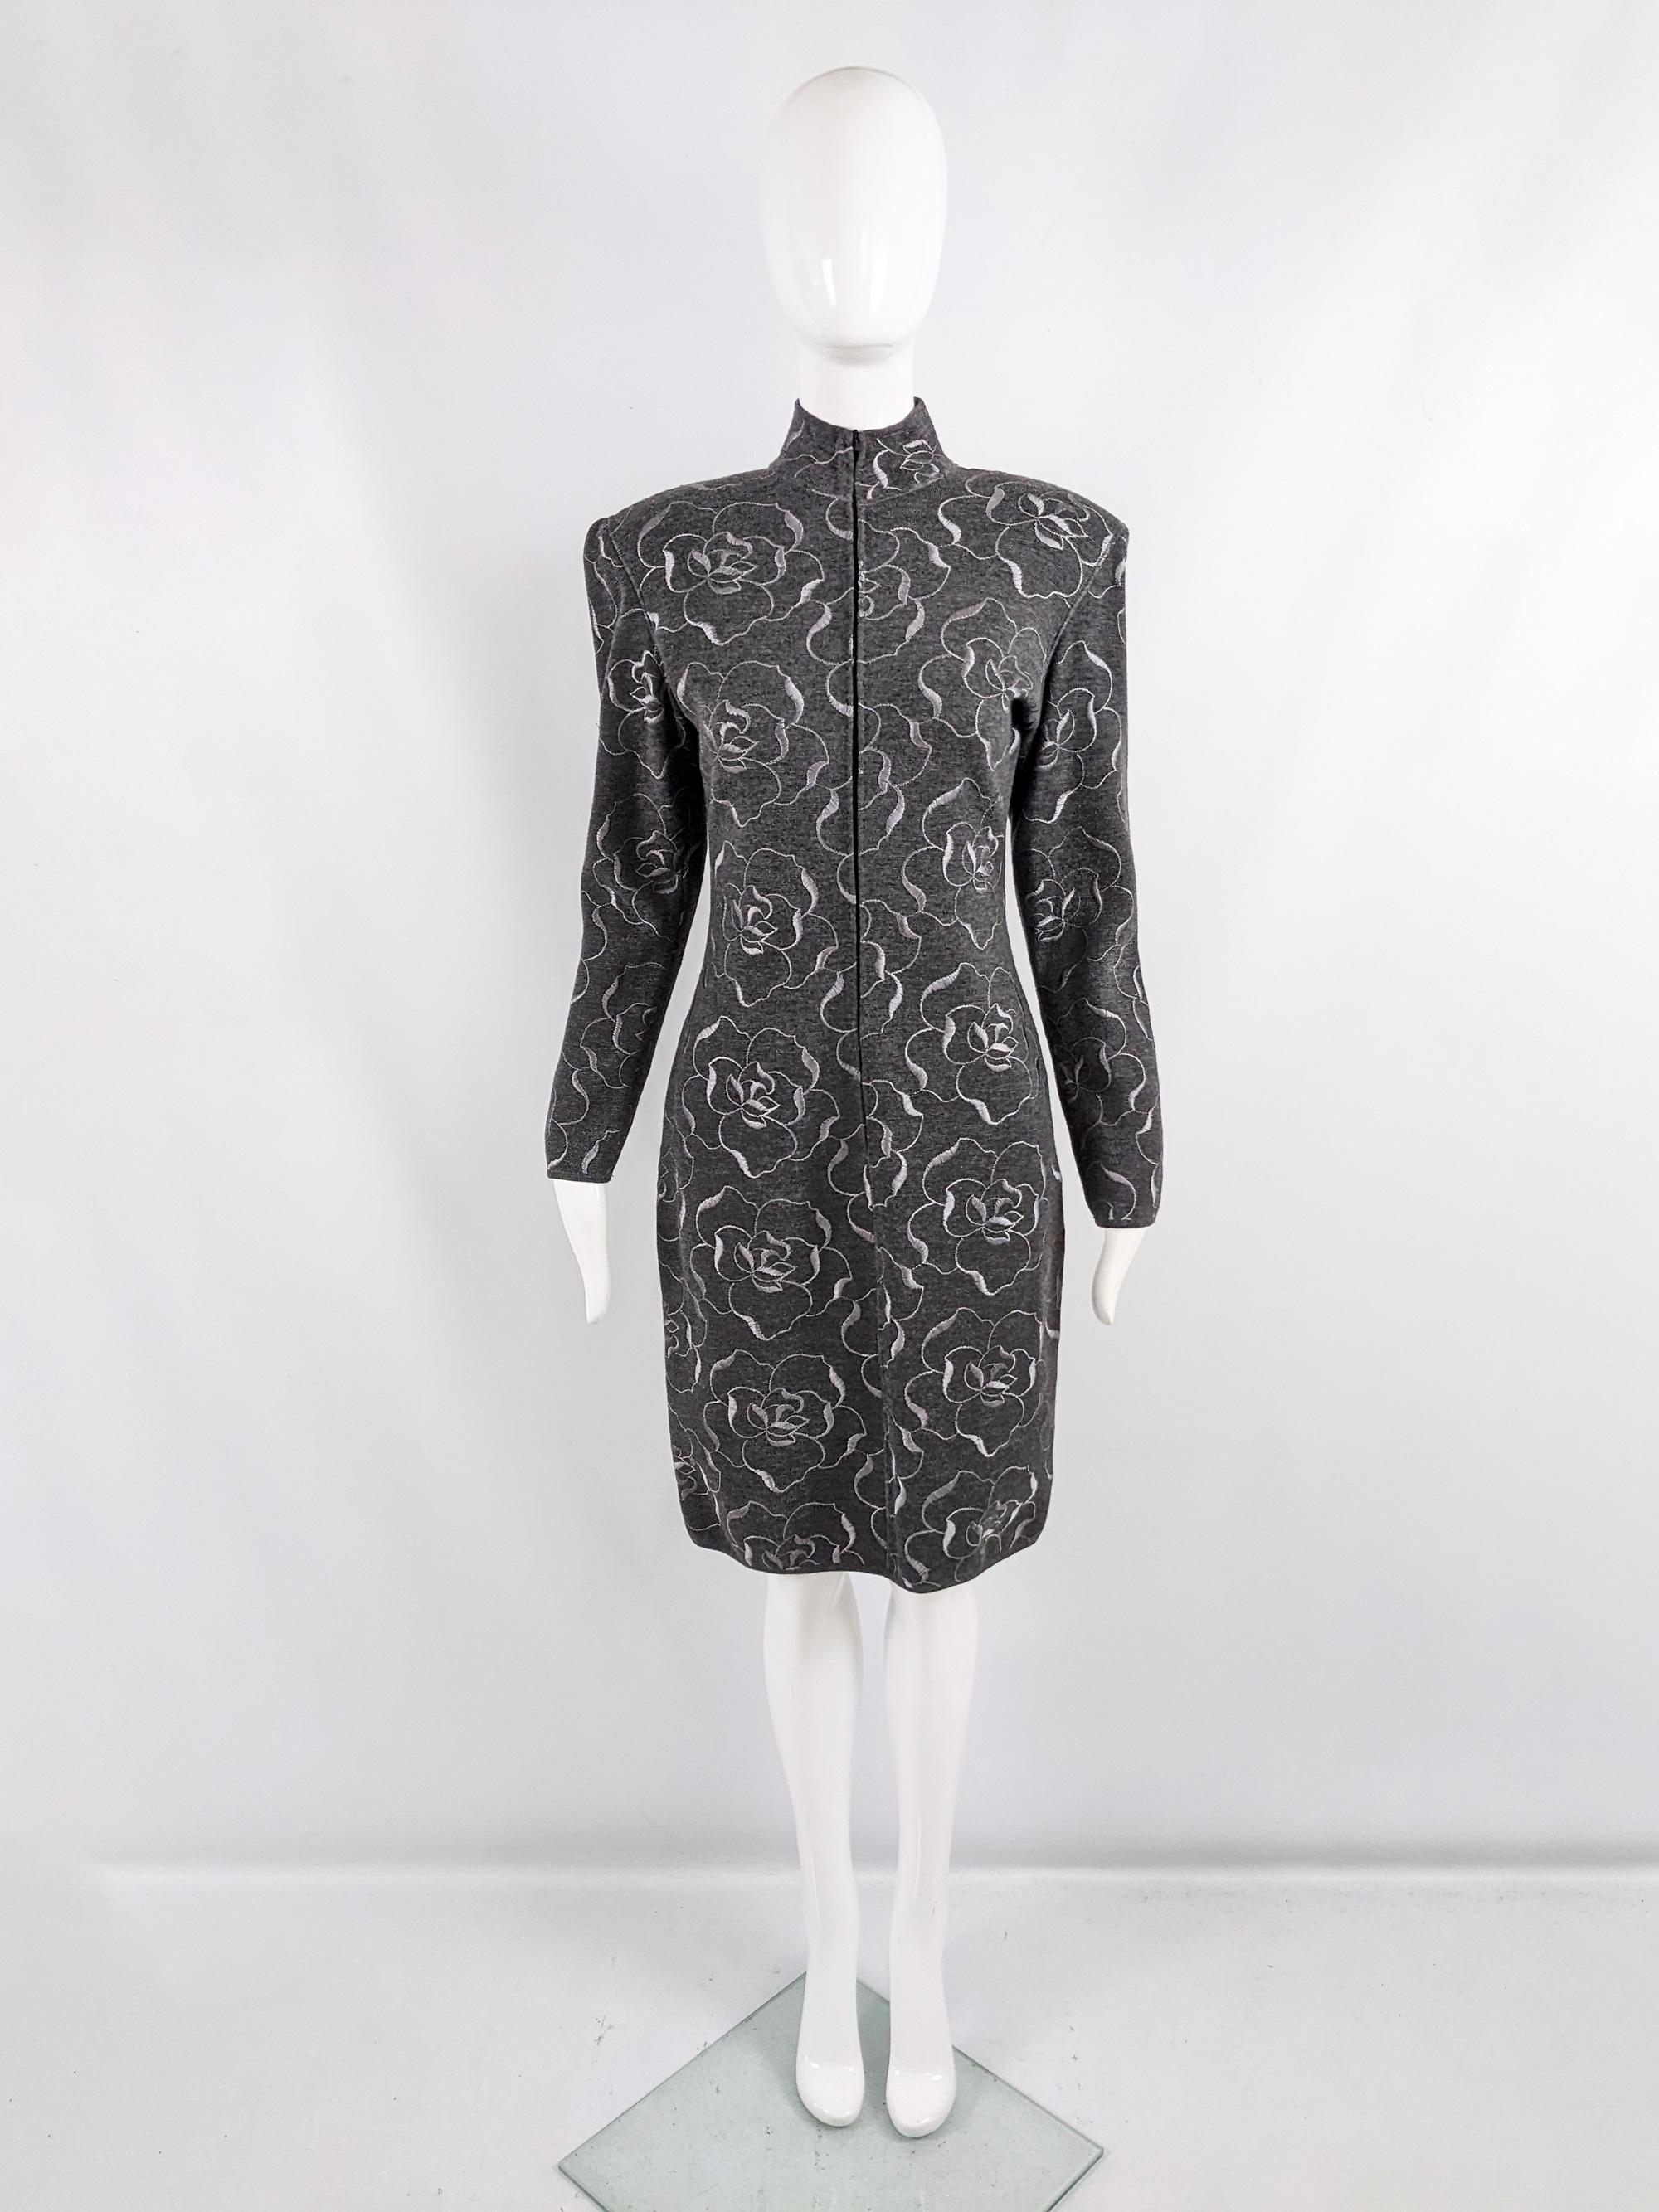 A stunning vintage womens dress from the 80s by luxury French fashion designer, Emanuel Ungaro. Made in Italy from a grey wool knit fabric highlighted with intricate lighter grey embroidery throughout. The silhouette is sexy and bold, with the knit